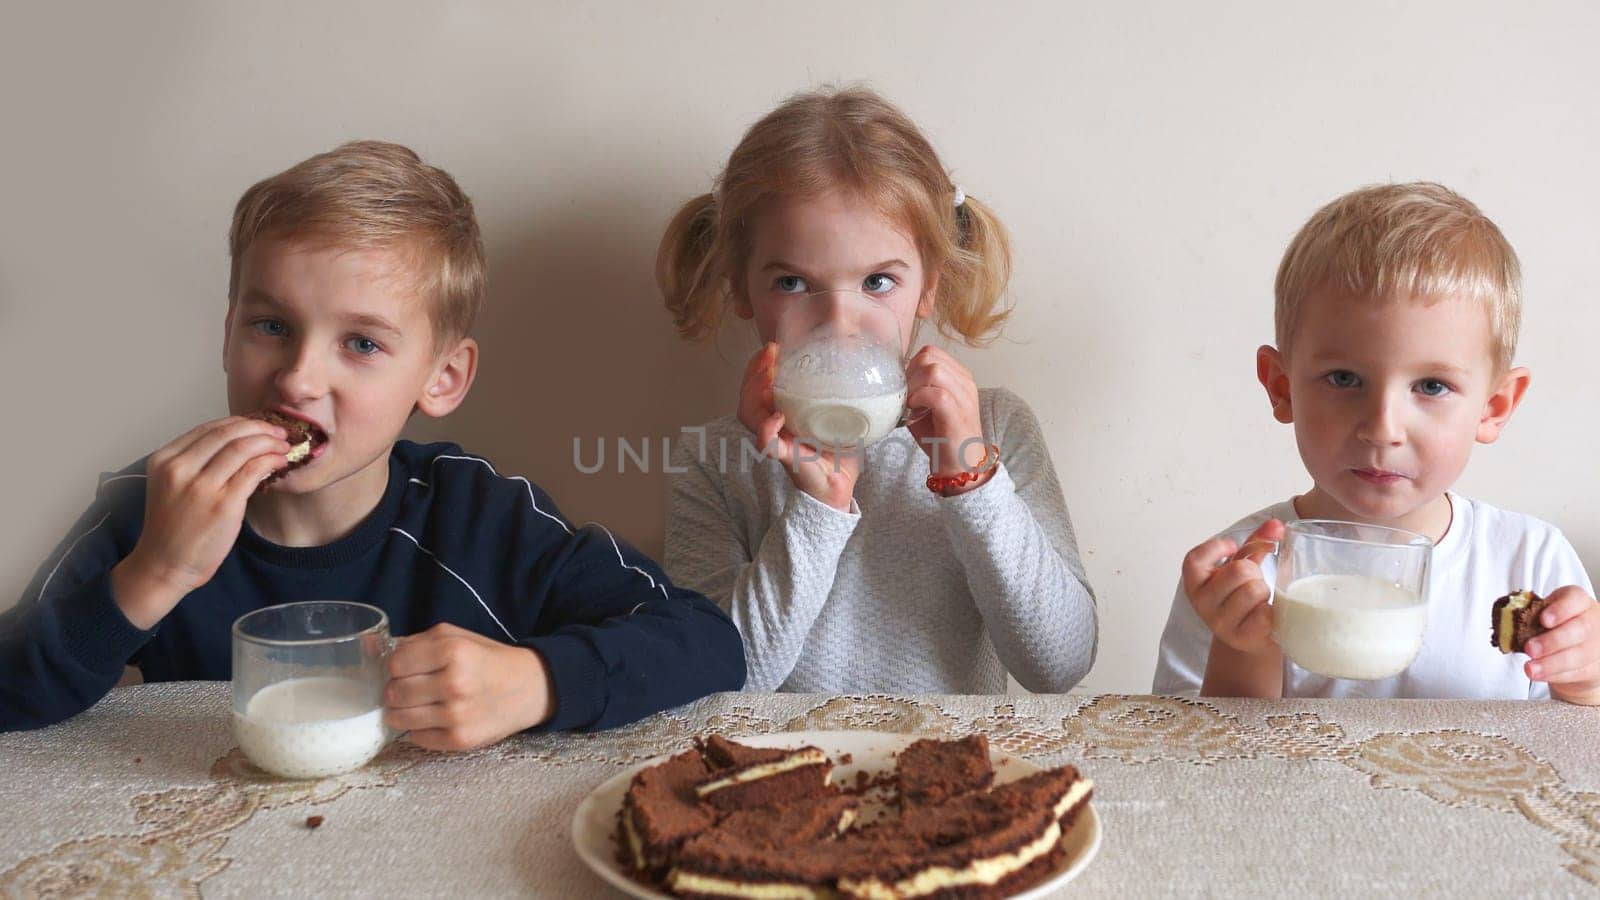 Children at the table eat milk and cookies. by DovidPro